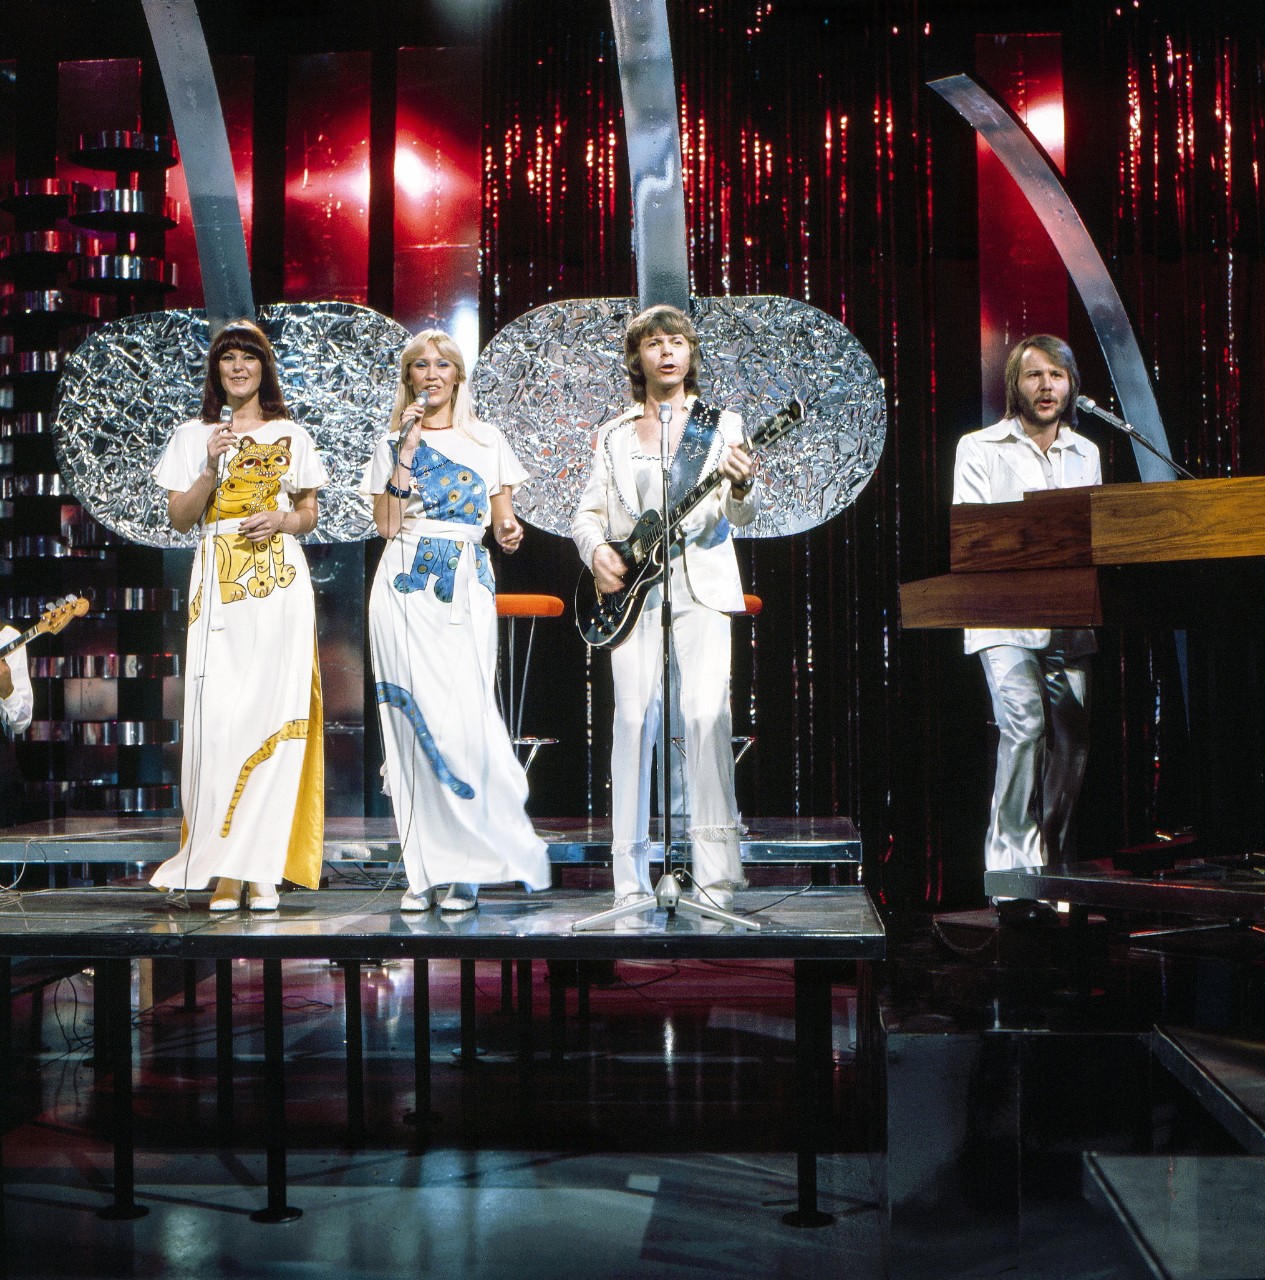 photo of ABBA, the Swedish pop group singing on stage wearing white jumpsuits.